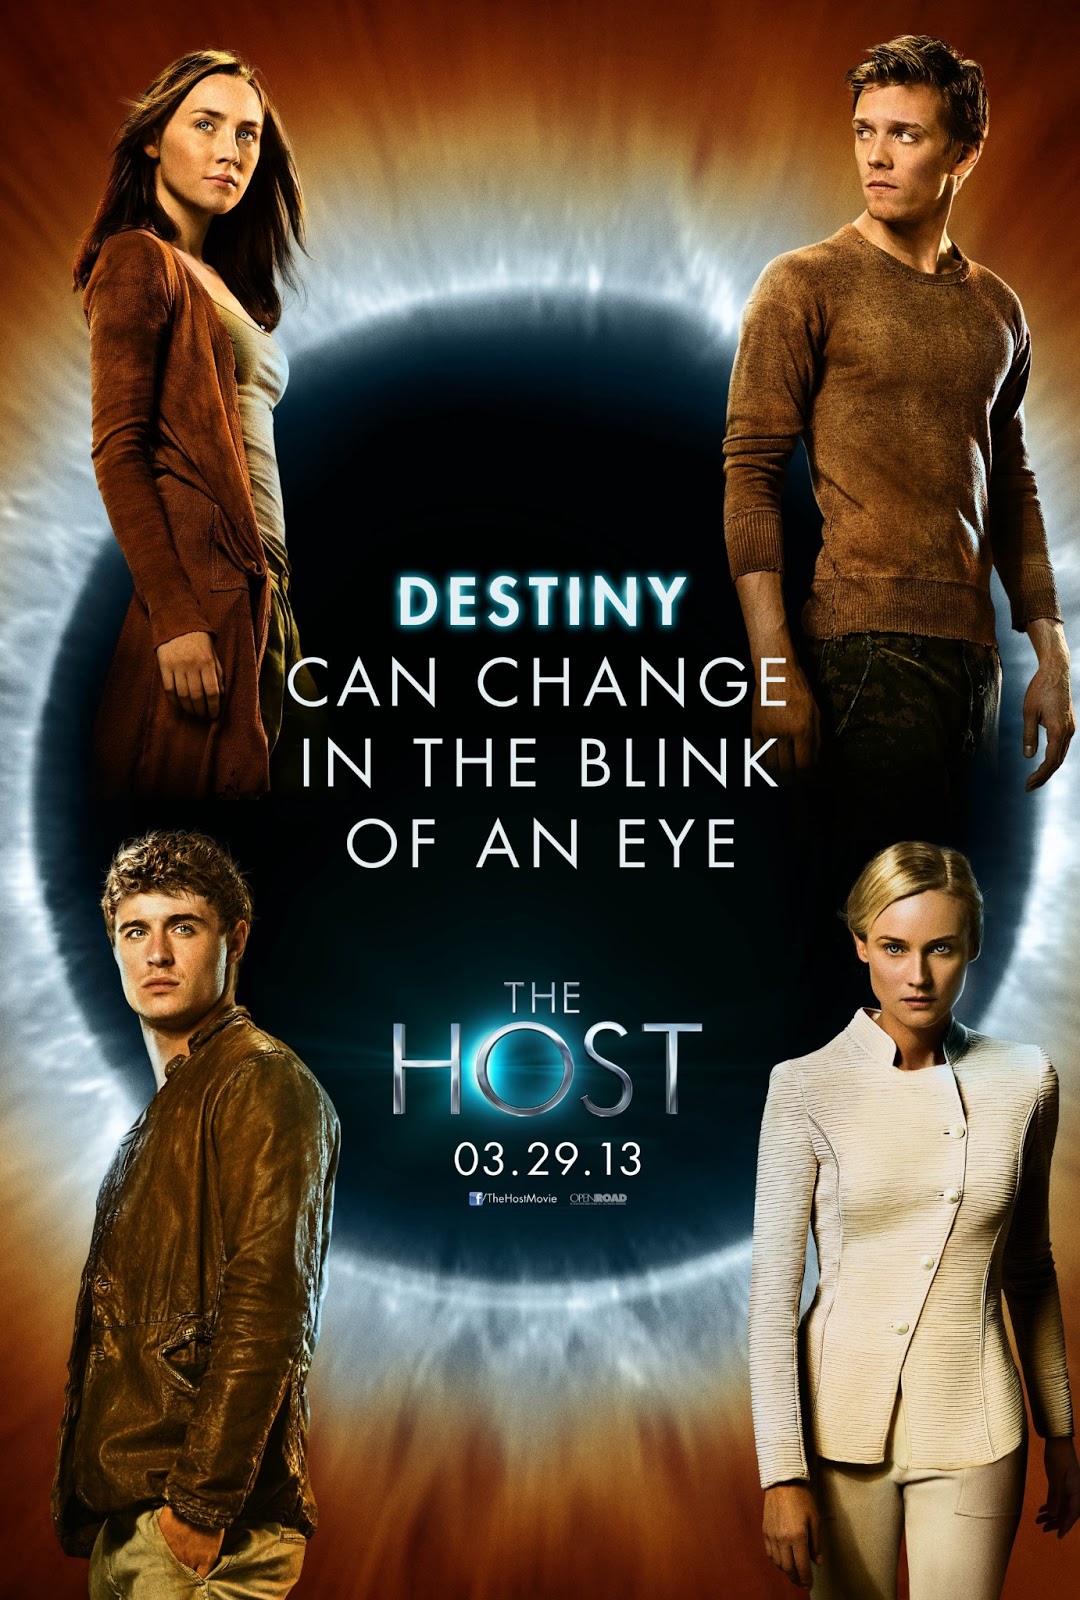 The Host American Romance Action Science Fiction Film